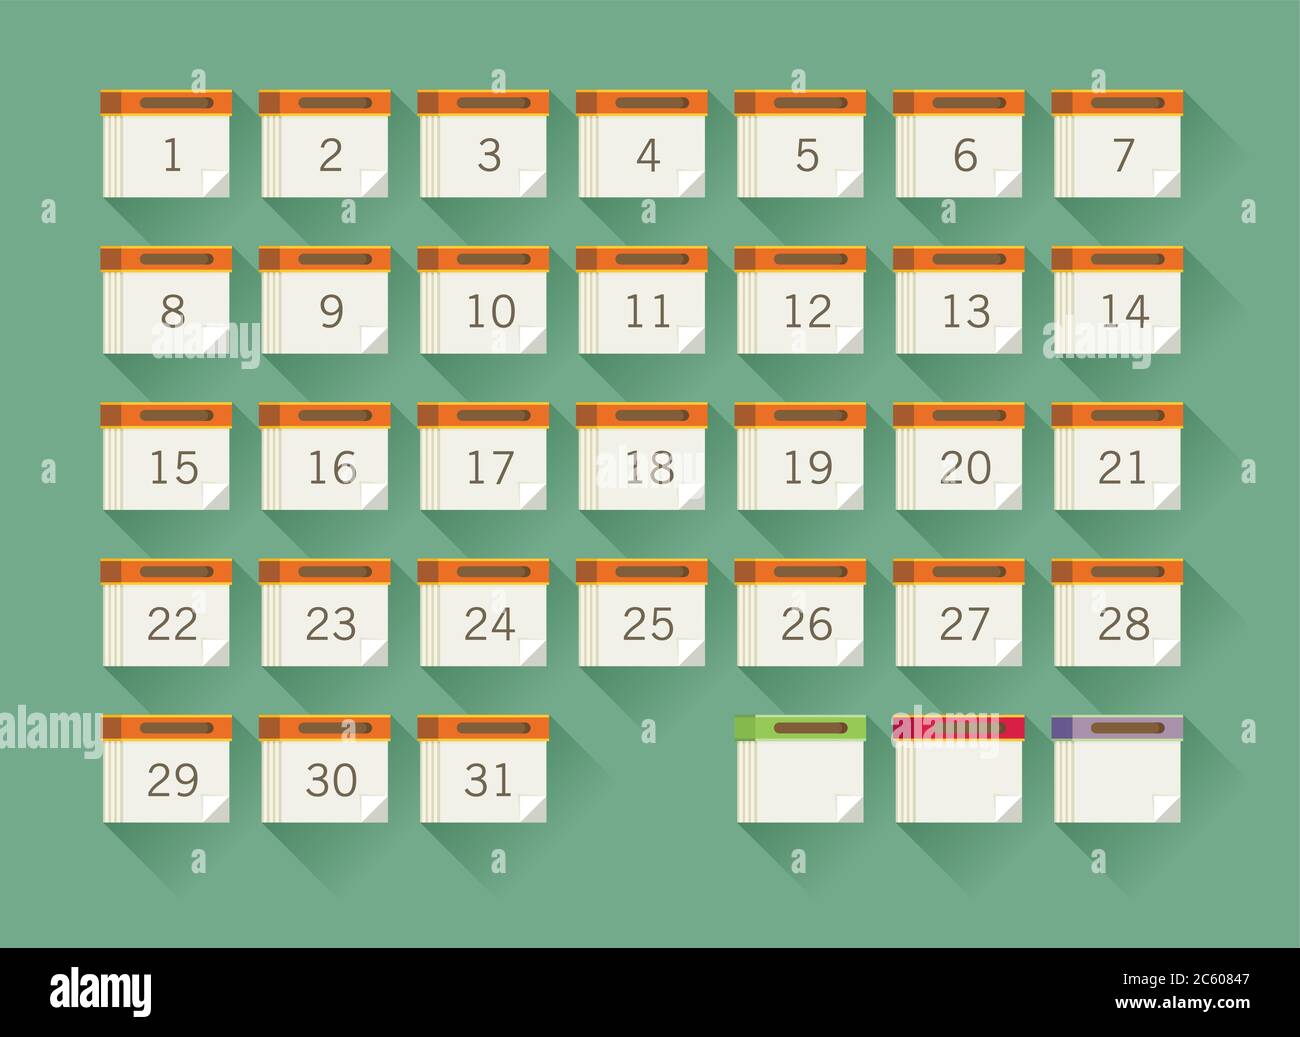 Flat calendar icon. Date and time background. Stock Vector